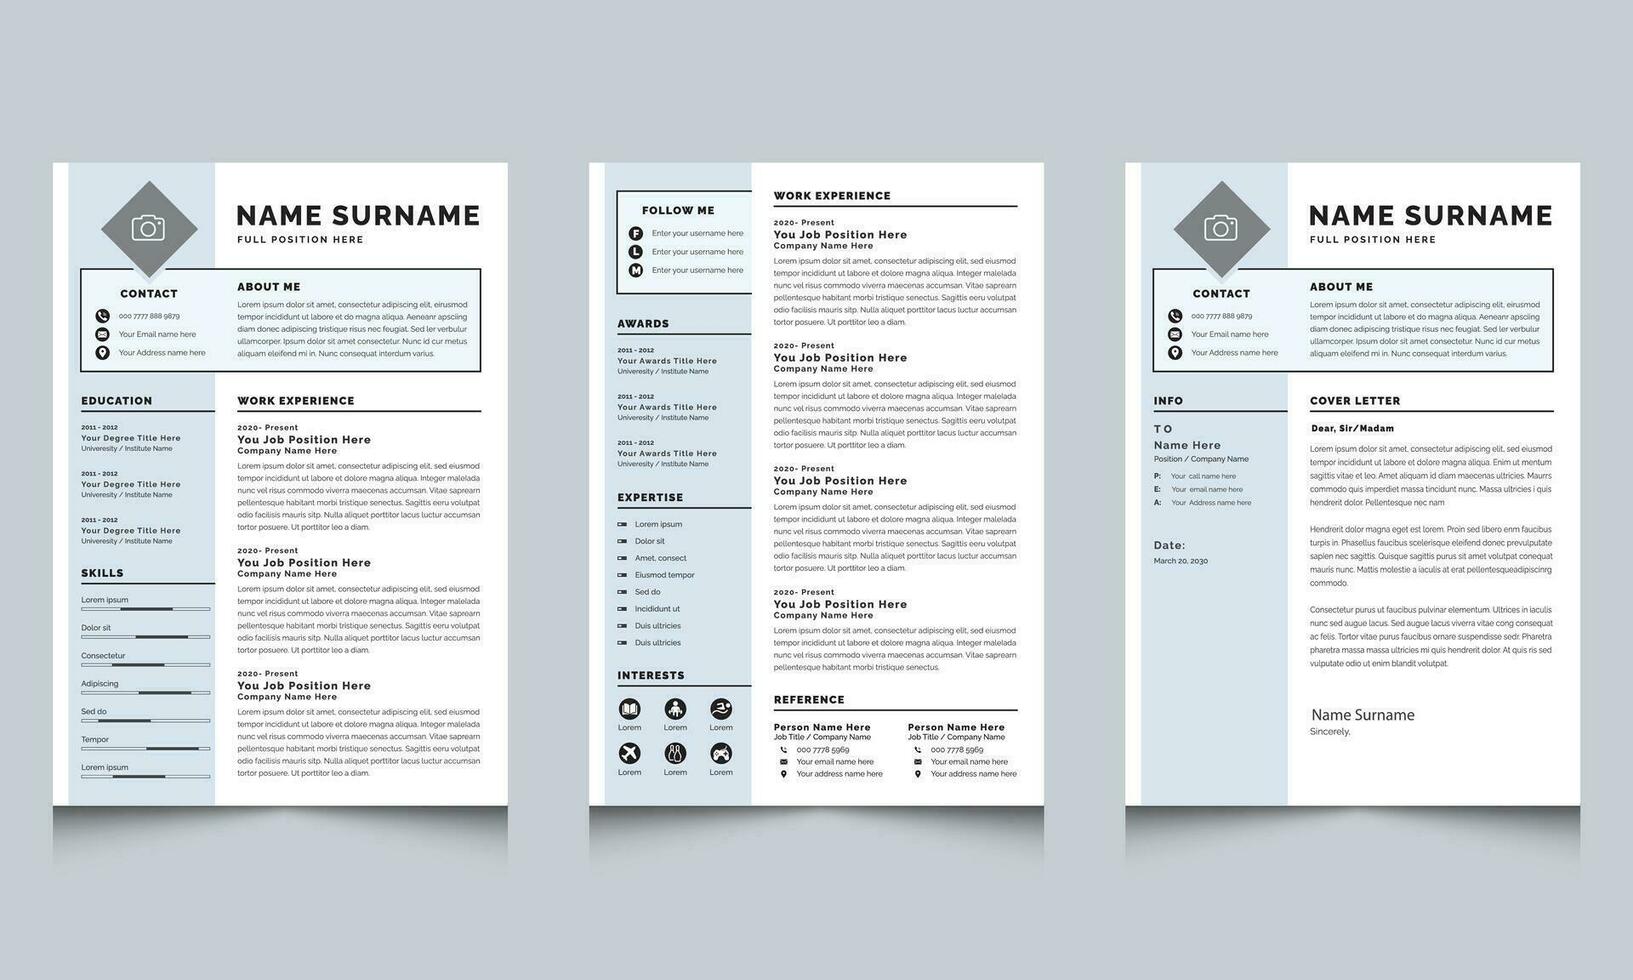 Resume and Cover Letter Layout with Blue Sidebar Design vector